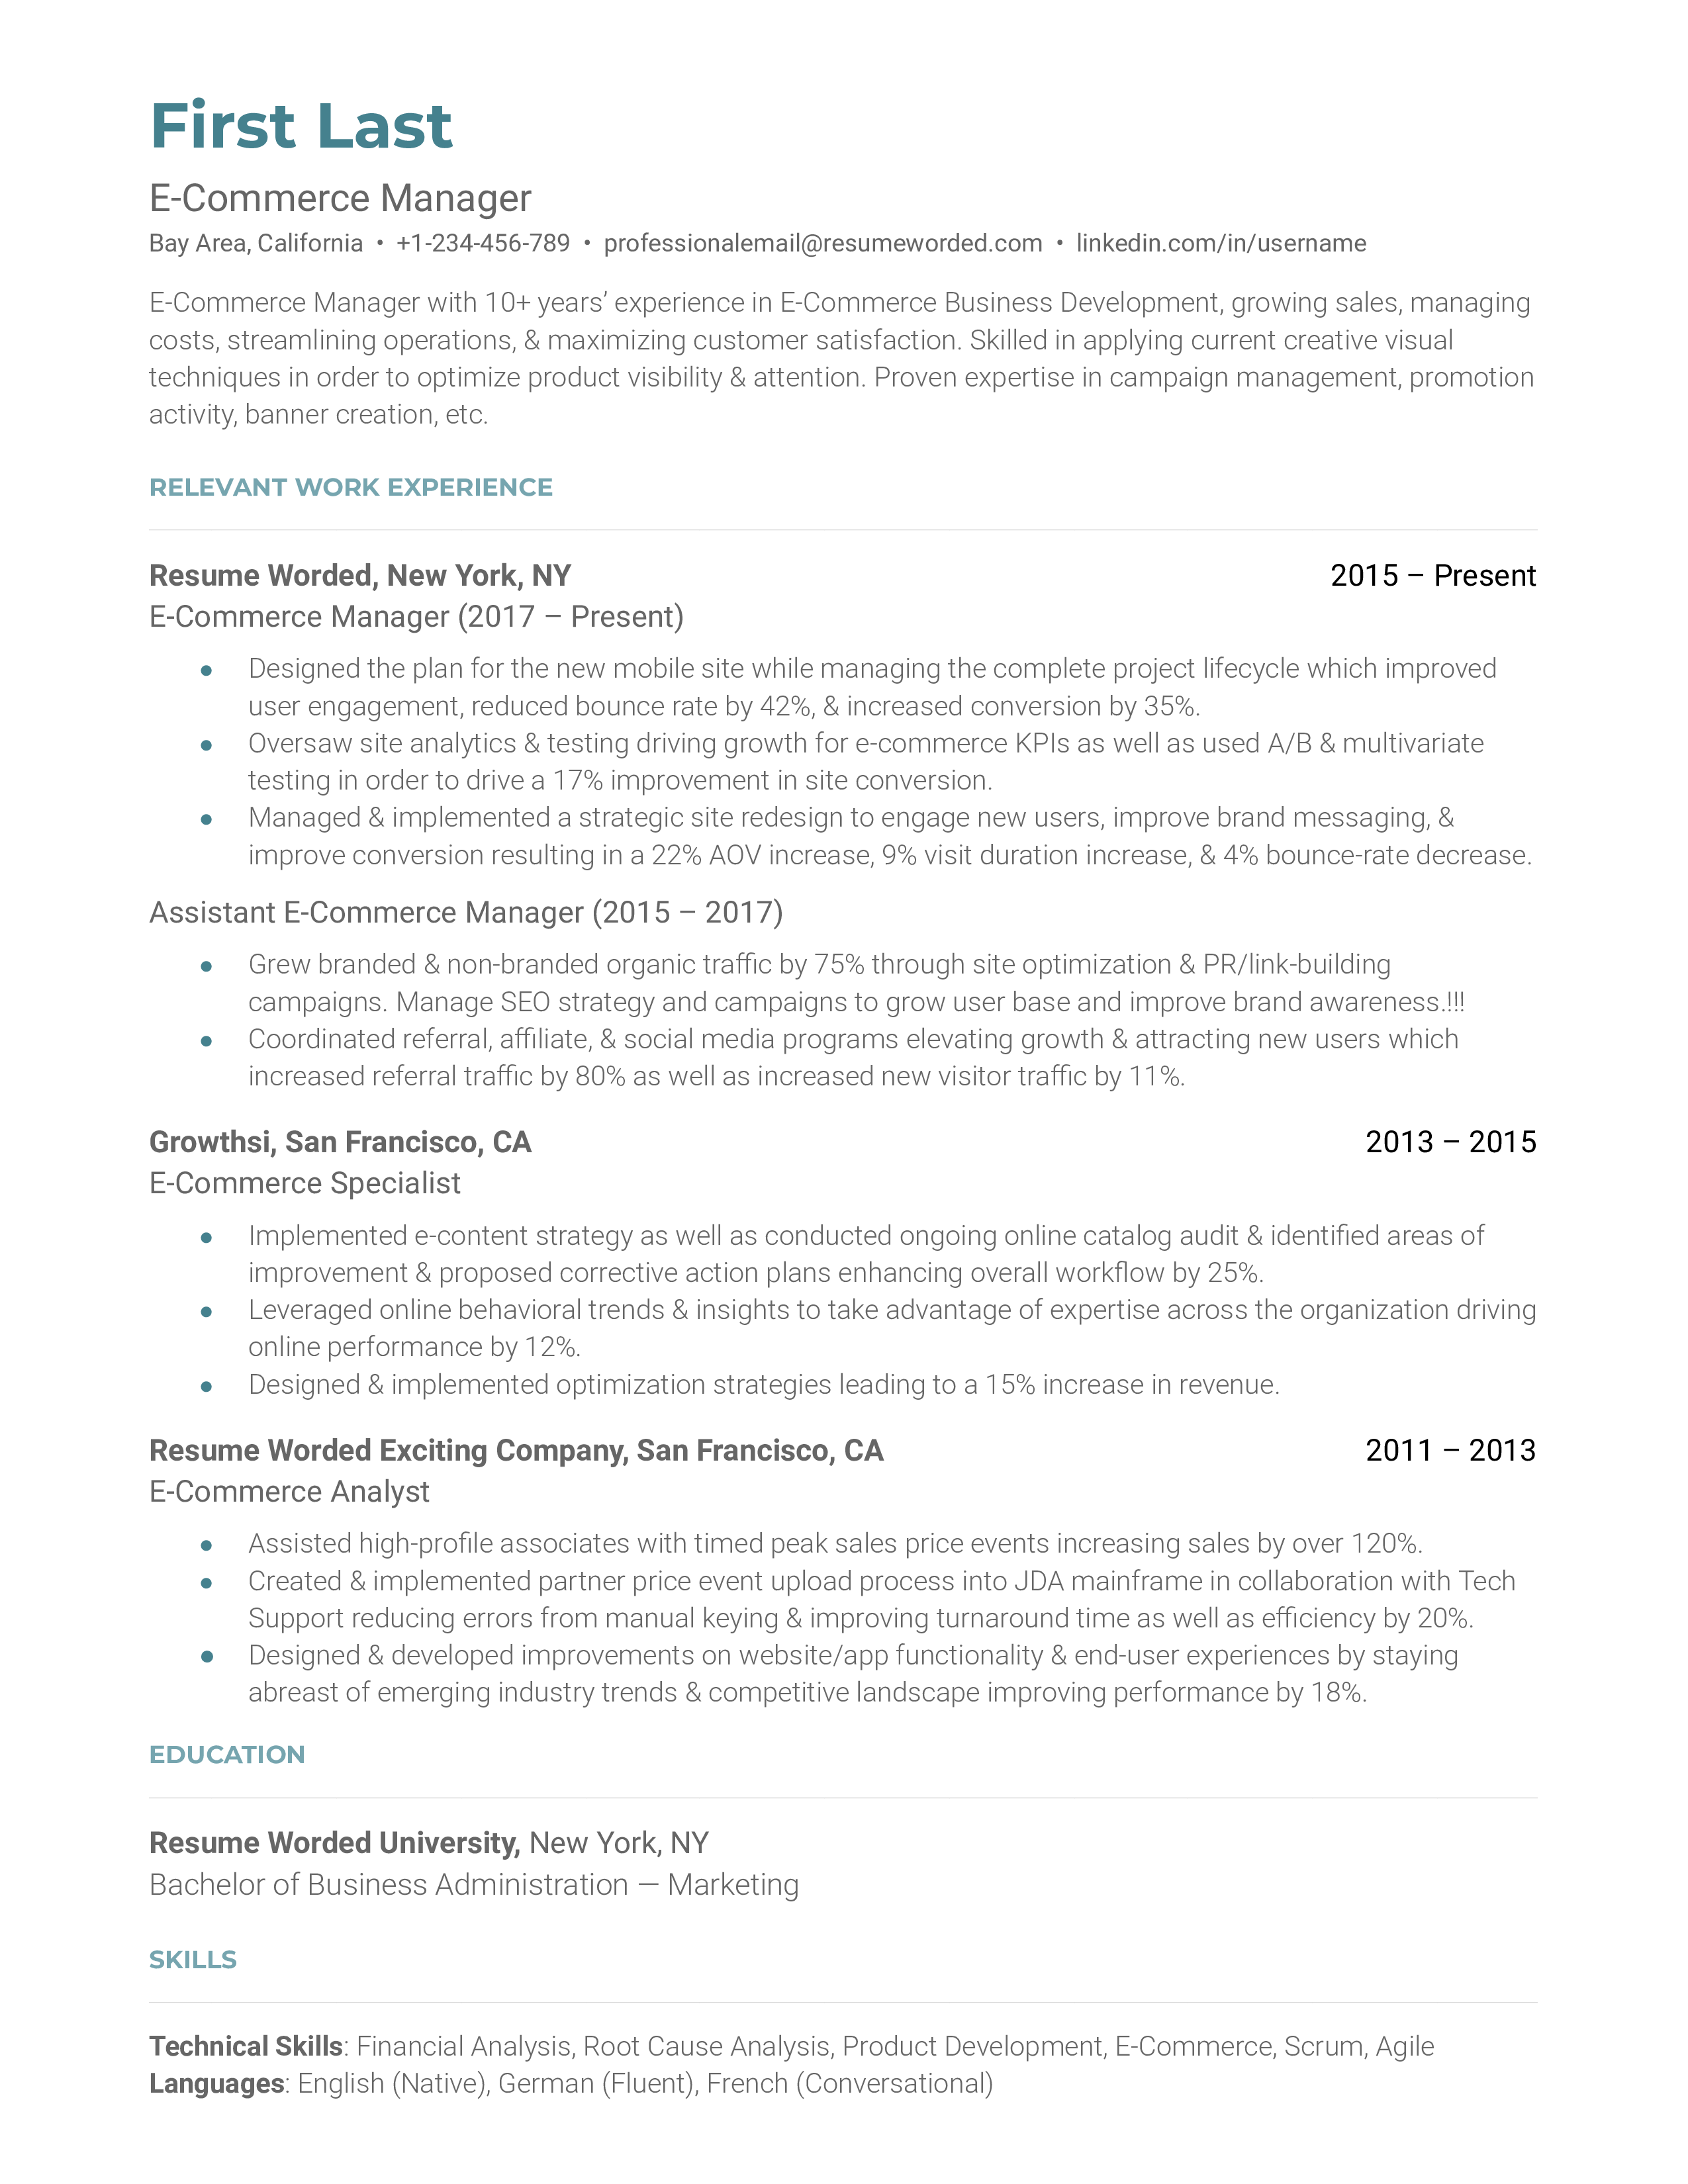 E-Commerce Manager Resume Template + Example